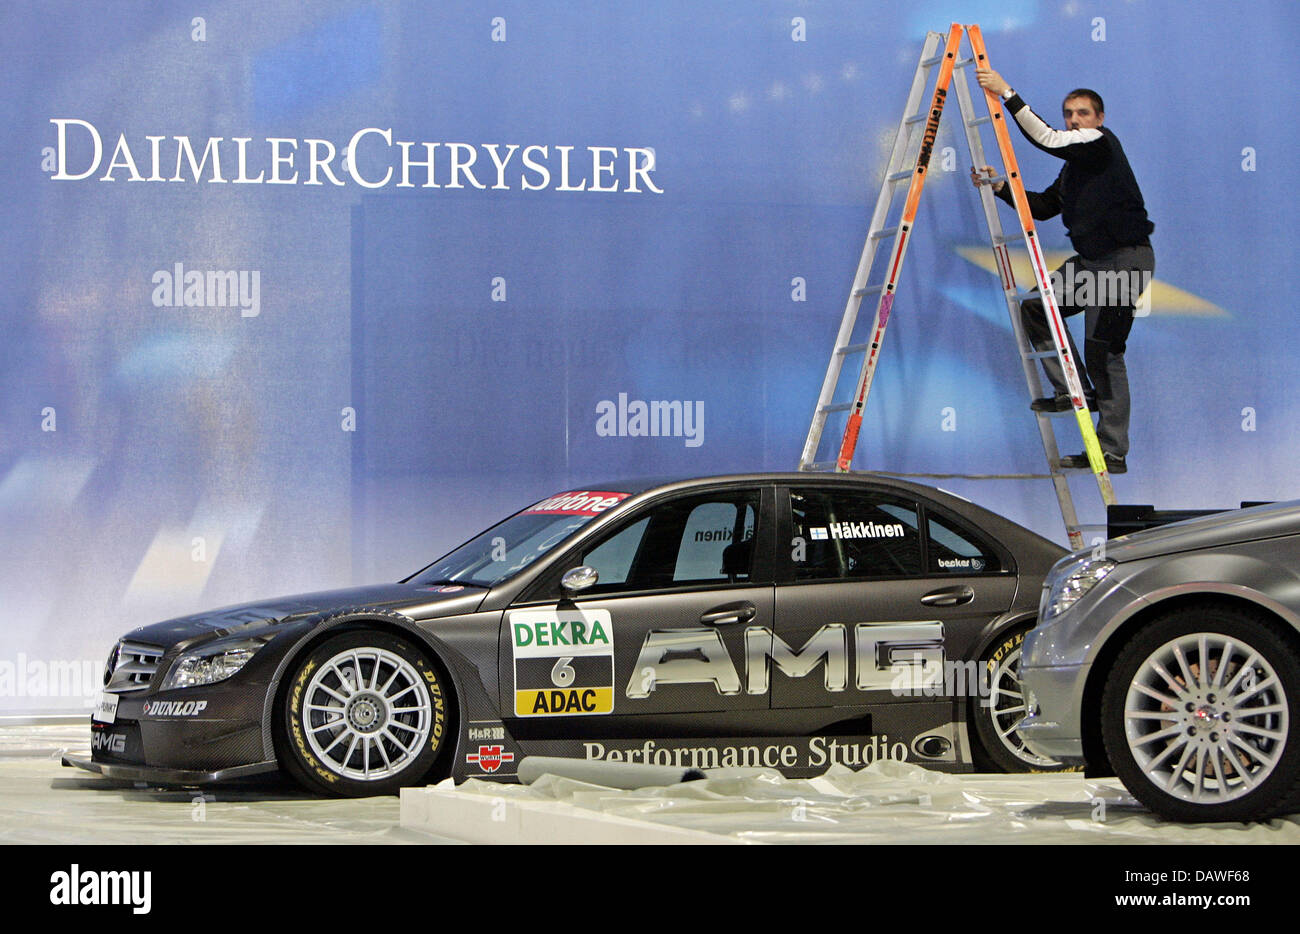 A worker cleans a 'DaimlerChrysler' advertising poster behind a Mercedes  C-Class tuned by AMG in preparation of the 17th AMI (AutoMobile  International) Leipzig motor show on the trade fair compounds in Leipzig,